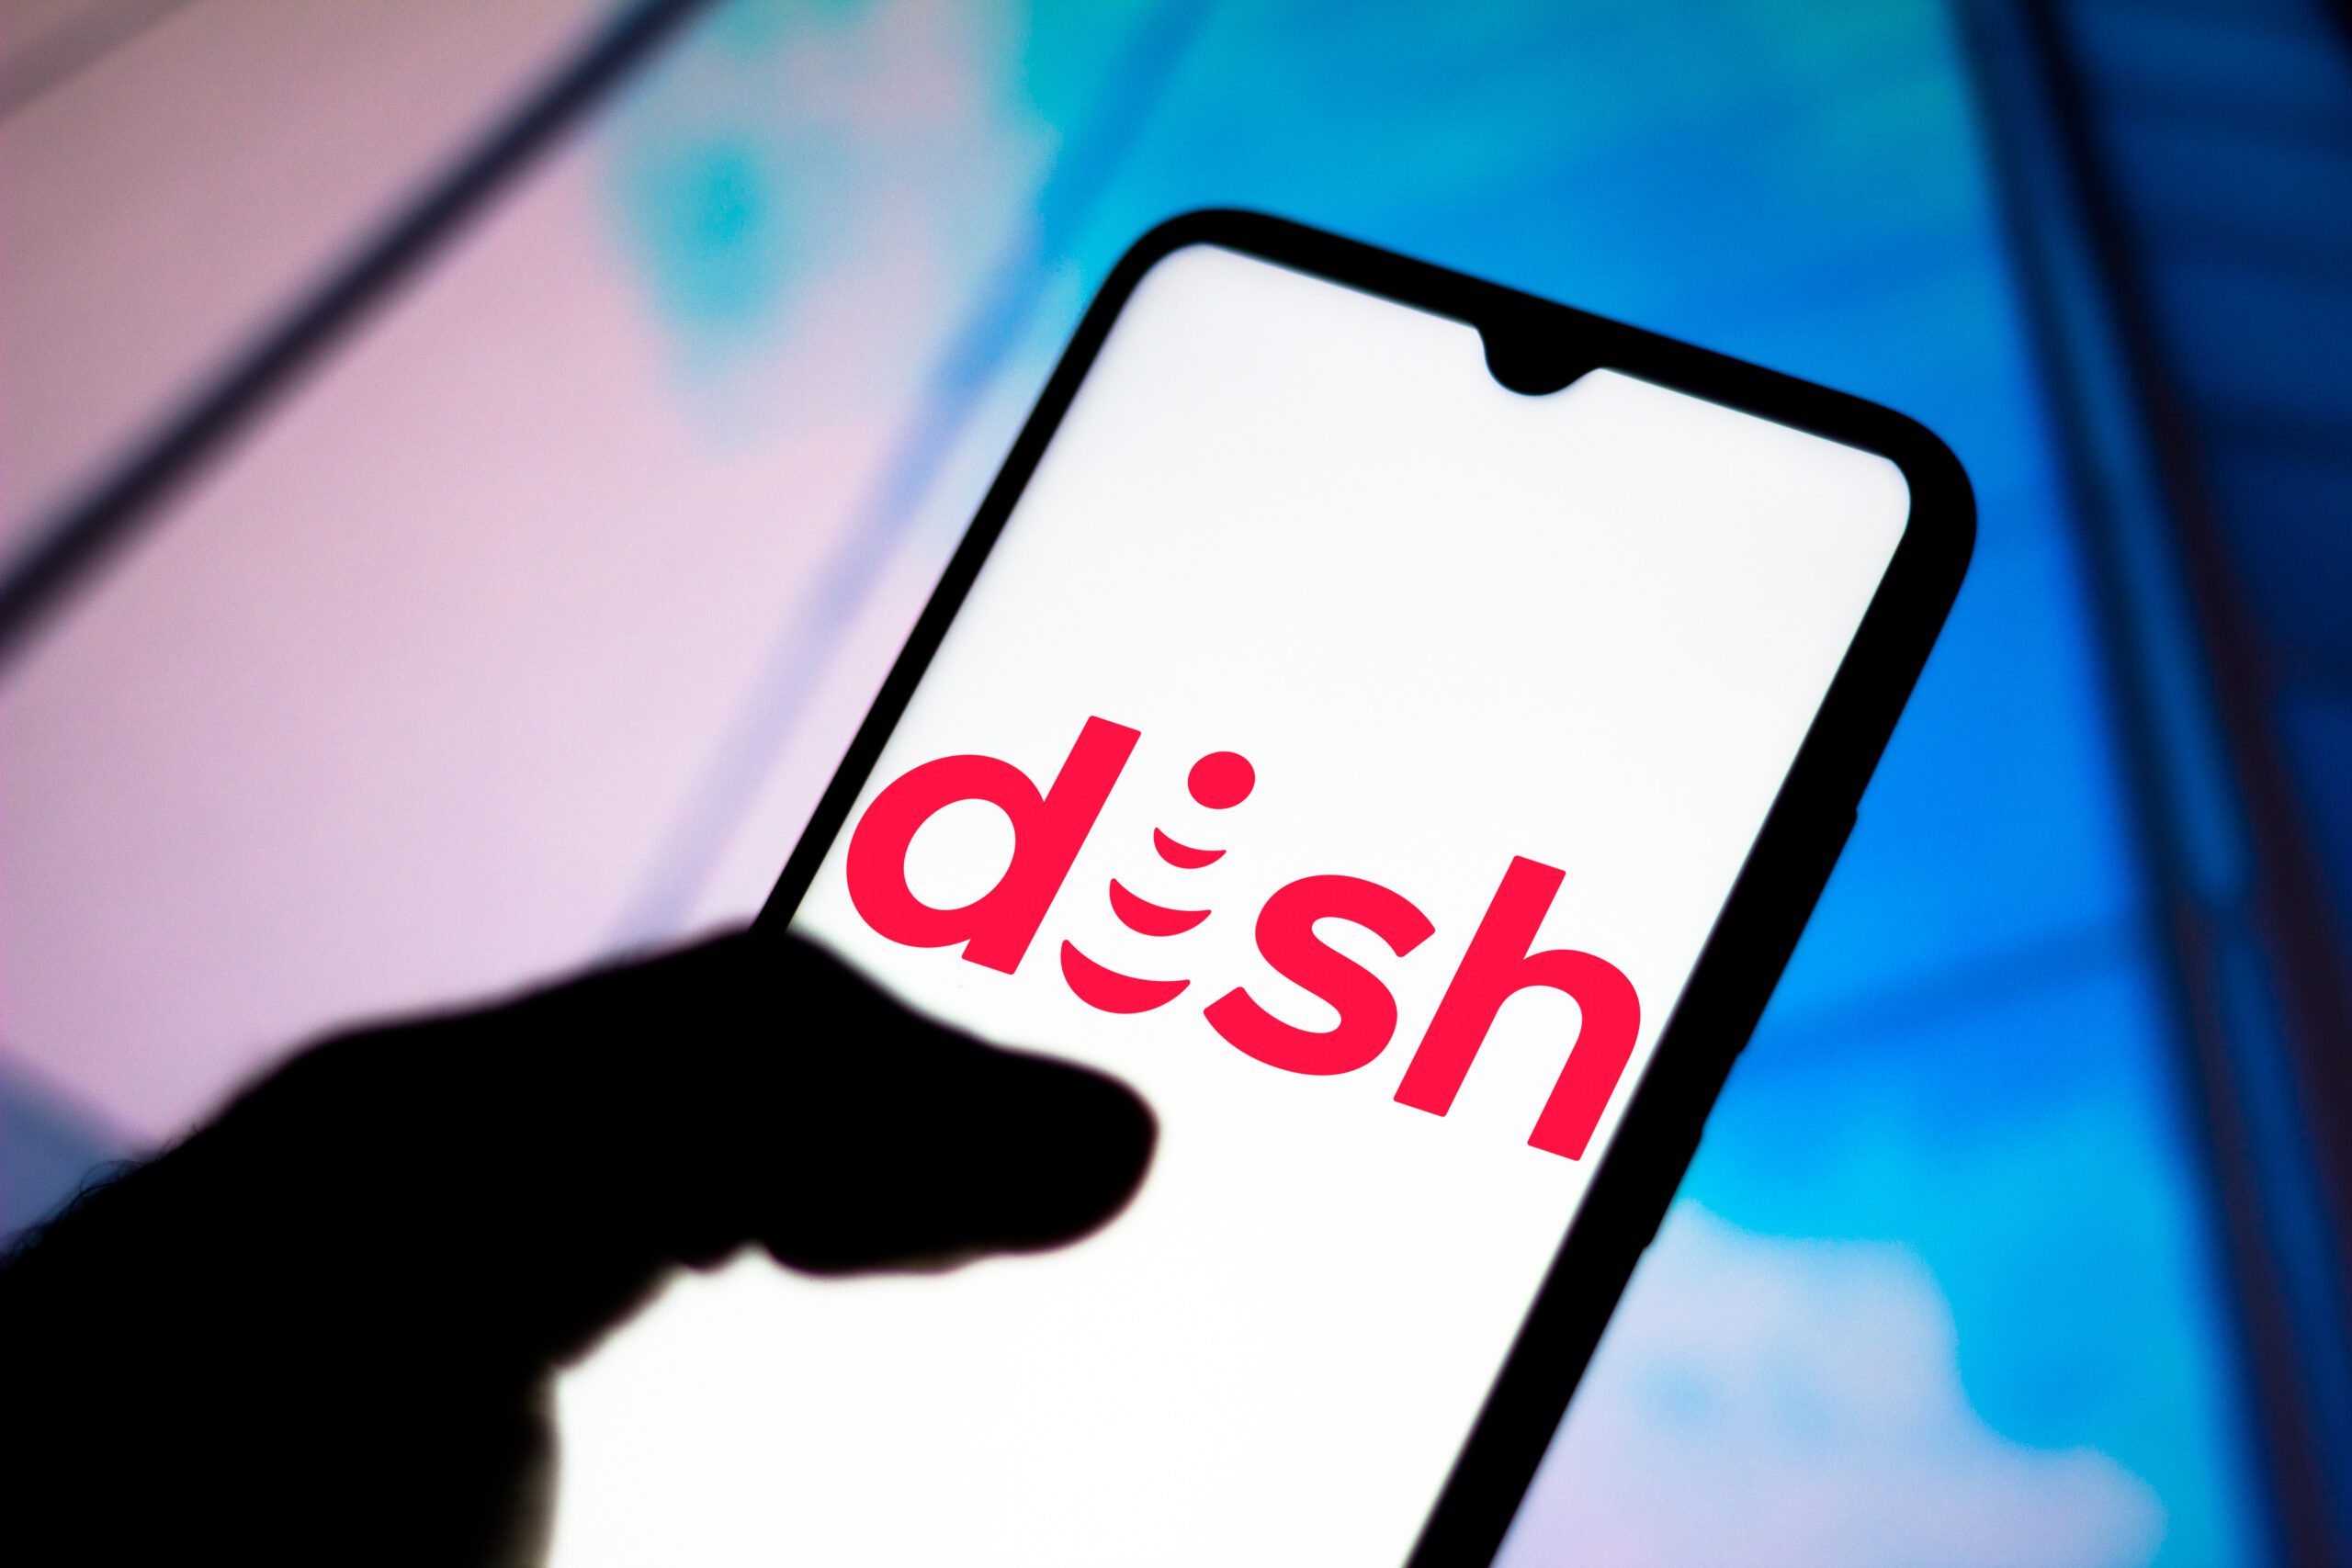 DISH Expands Boost Wireless’s 5G Voice Coverage, But How Many People Are on the Network?